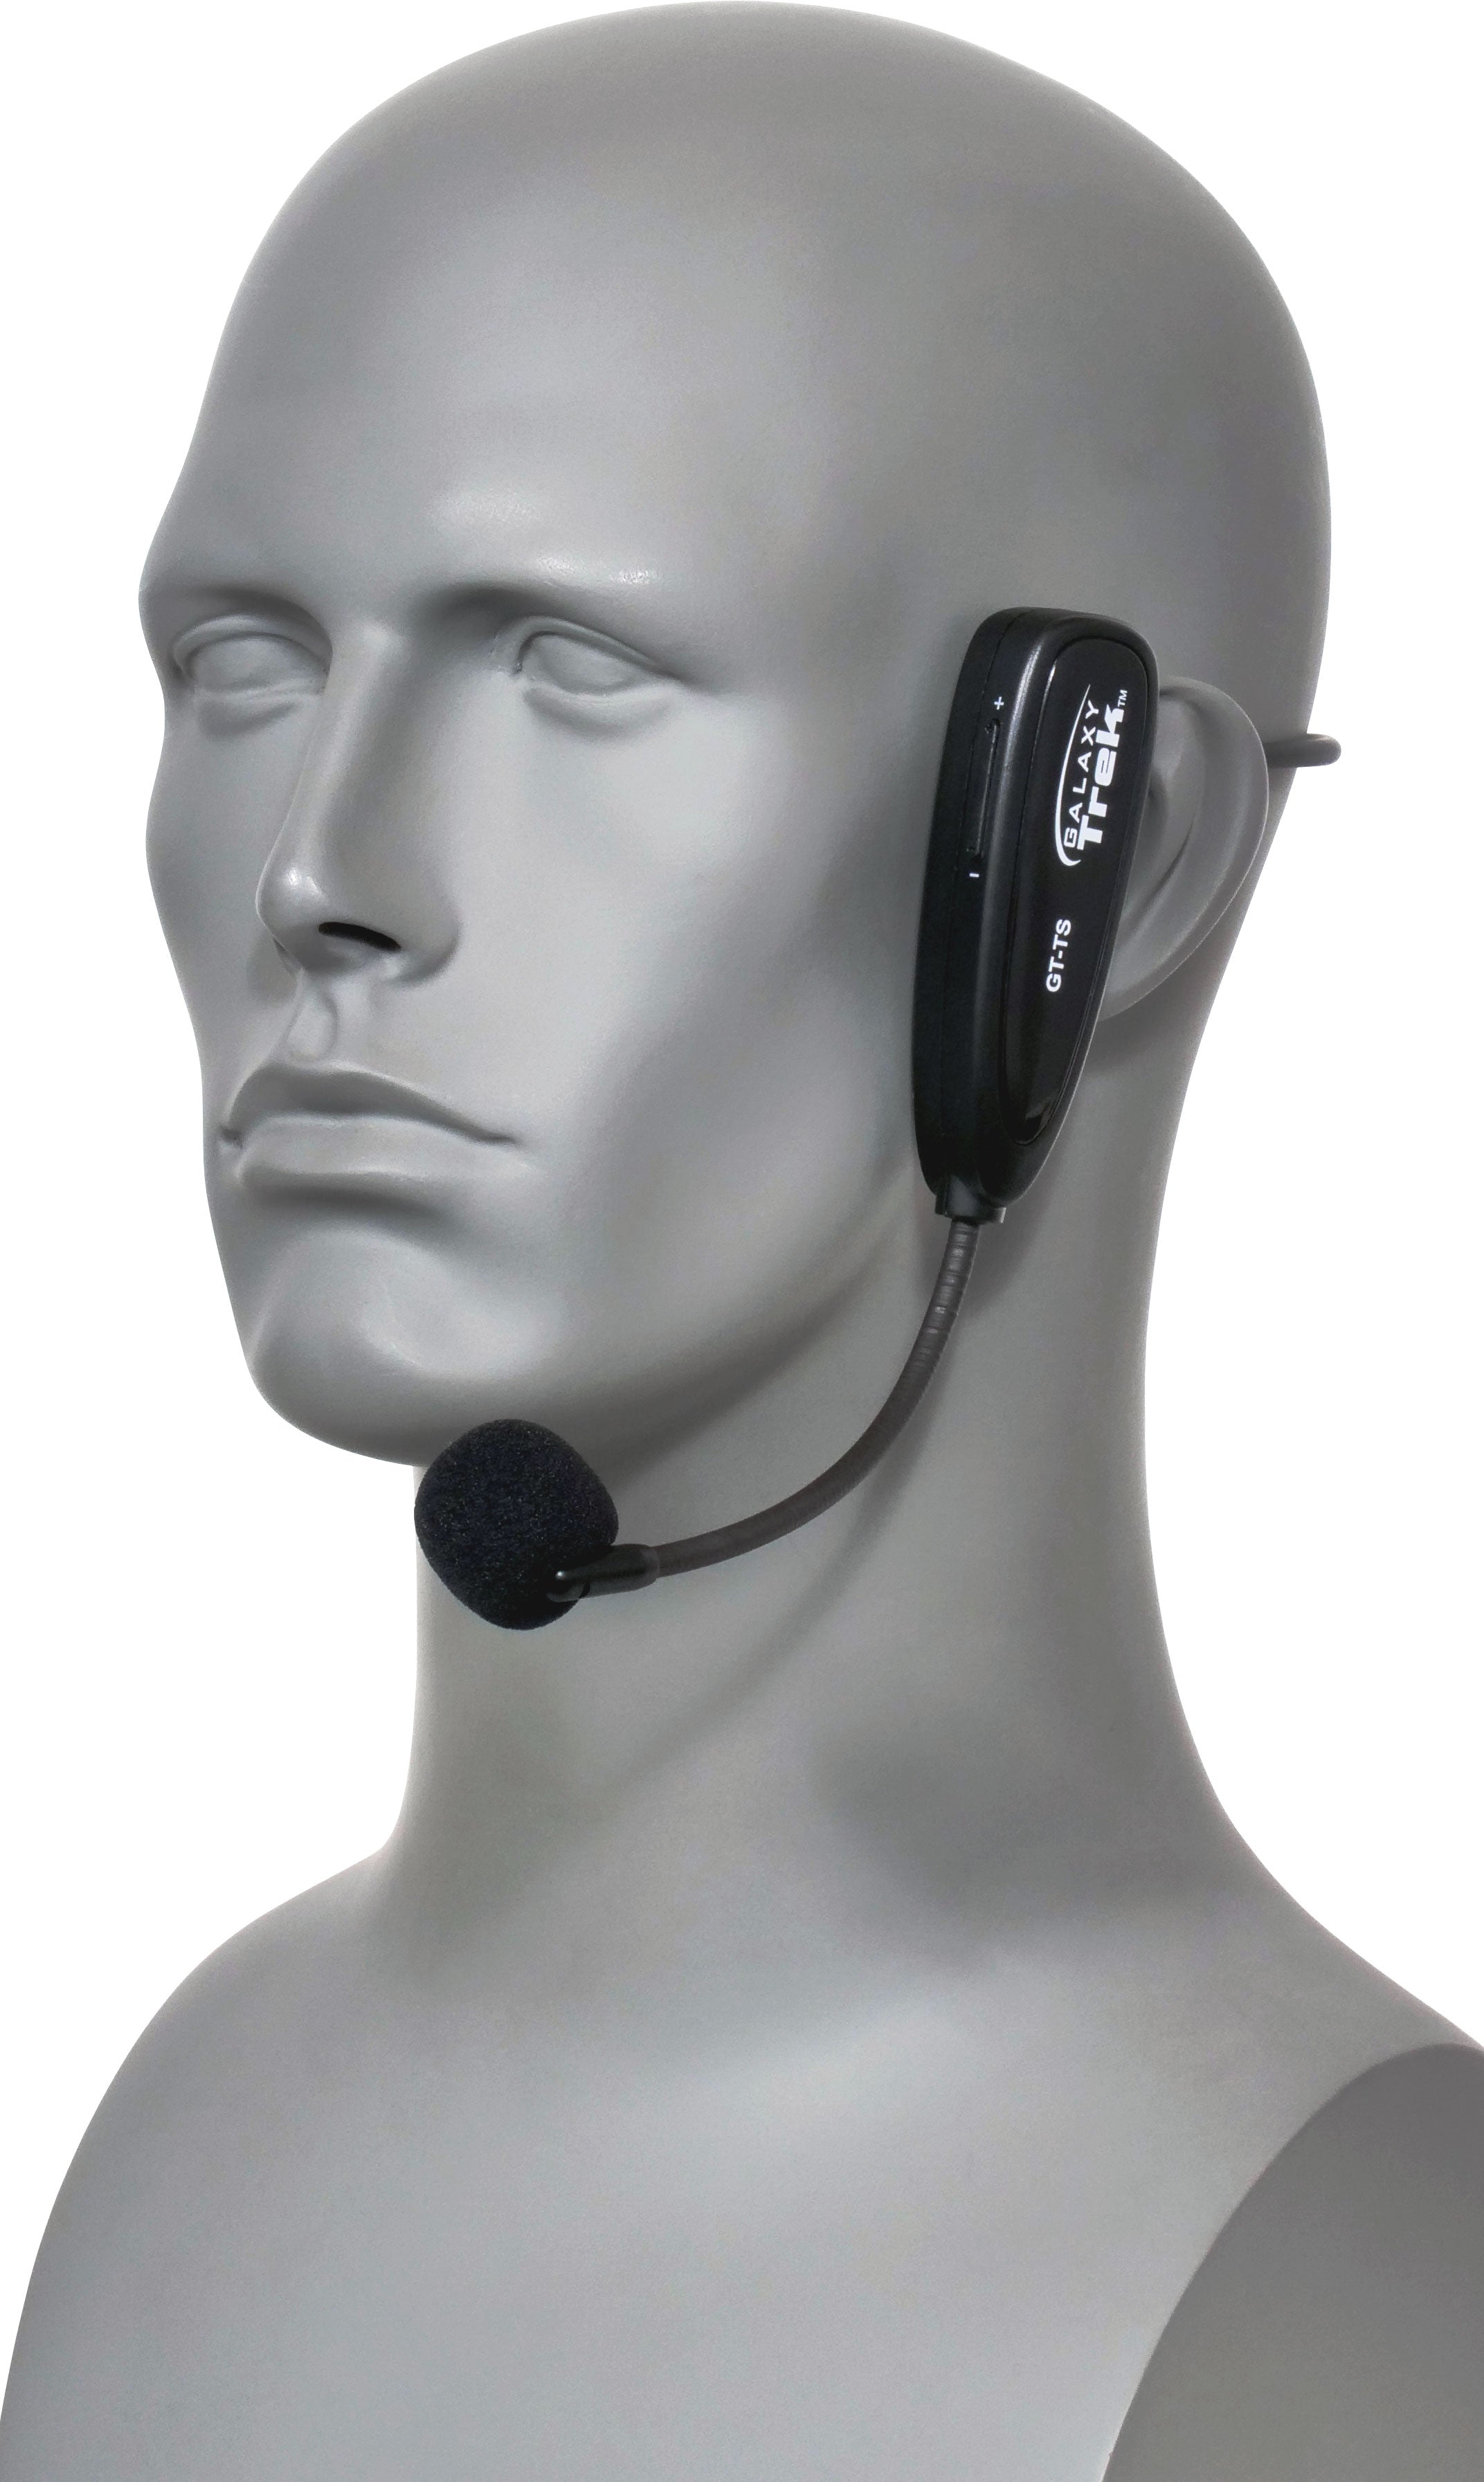 (NEW) Totally Wireless Headset Mic/Transmitter/Receiver by Galaxy Audio